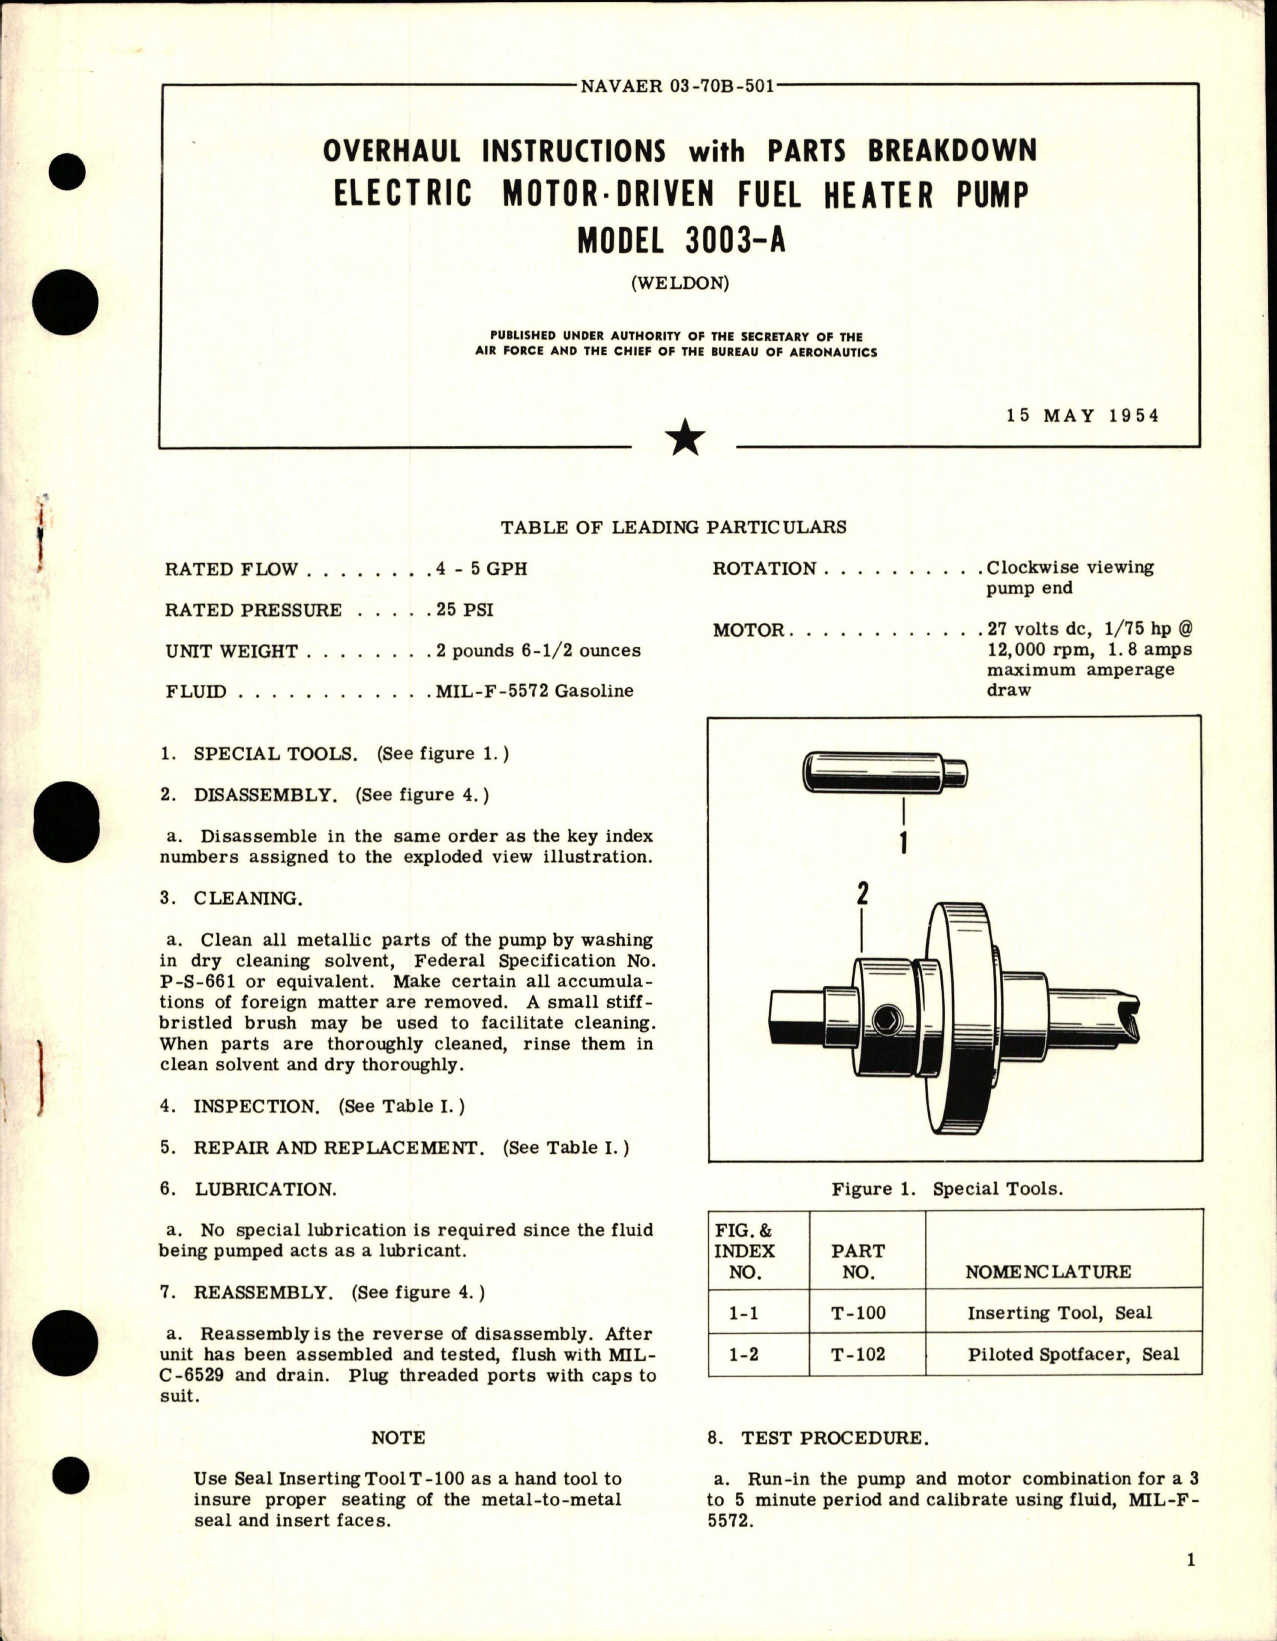 Sample page 1 from AirCorps Library document: Overhaul Instructions with Parts Breakdown for Electric Motor-Driven Fuel Heater Pump - Model 3003-A